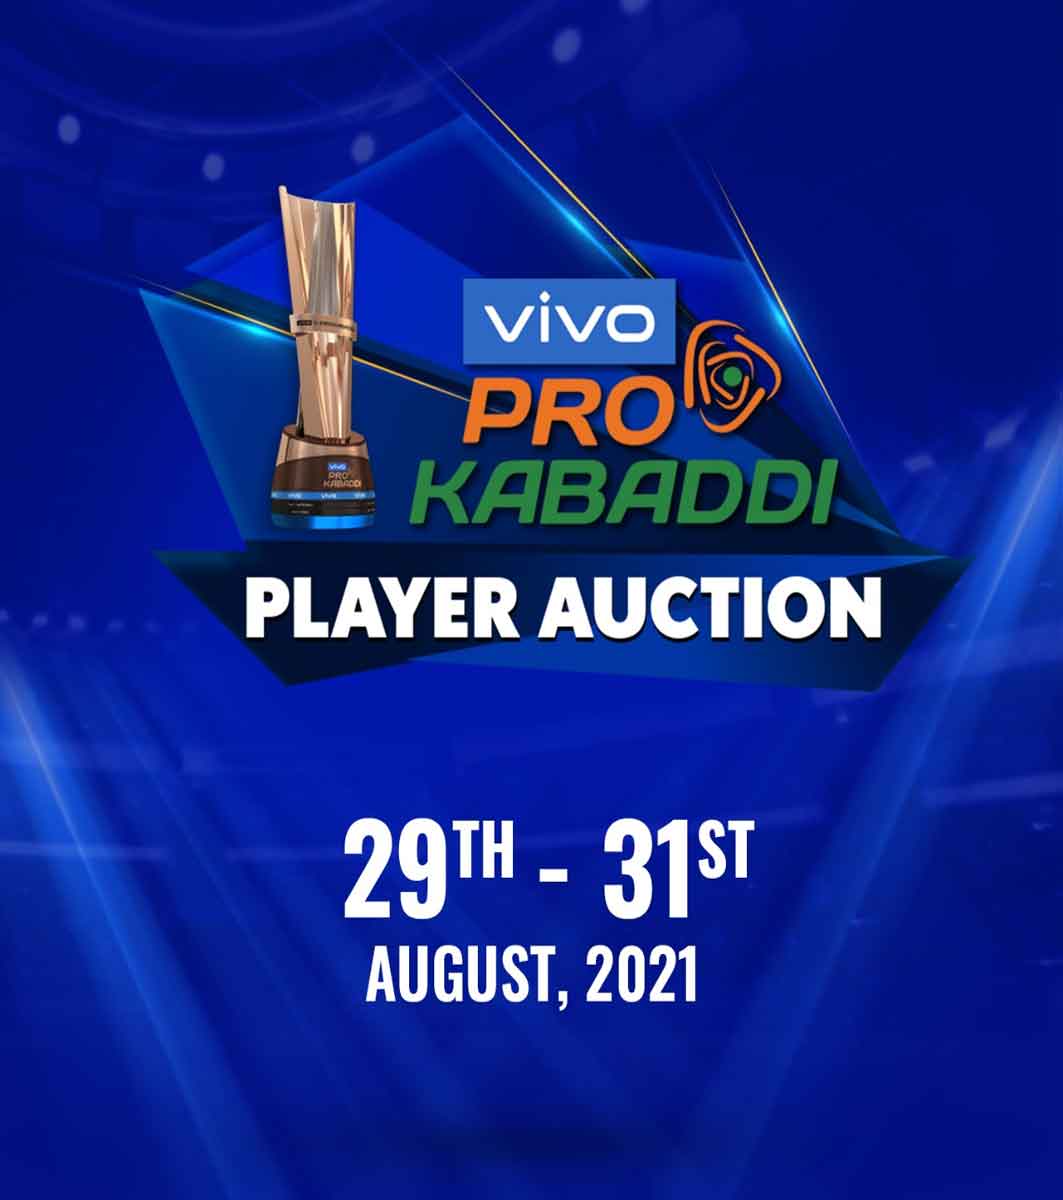 STAGE SET FOR VIVO PRO KABADDI LEAGUE’S RETURN! SEASON 8 PLAYER AUCTIONS SCHEDULED FOR AUGUST 29-31